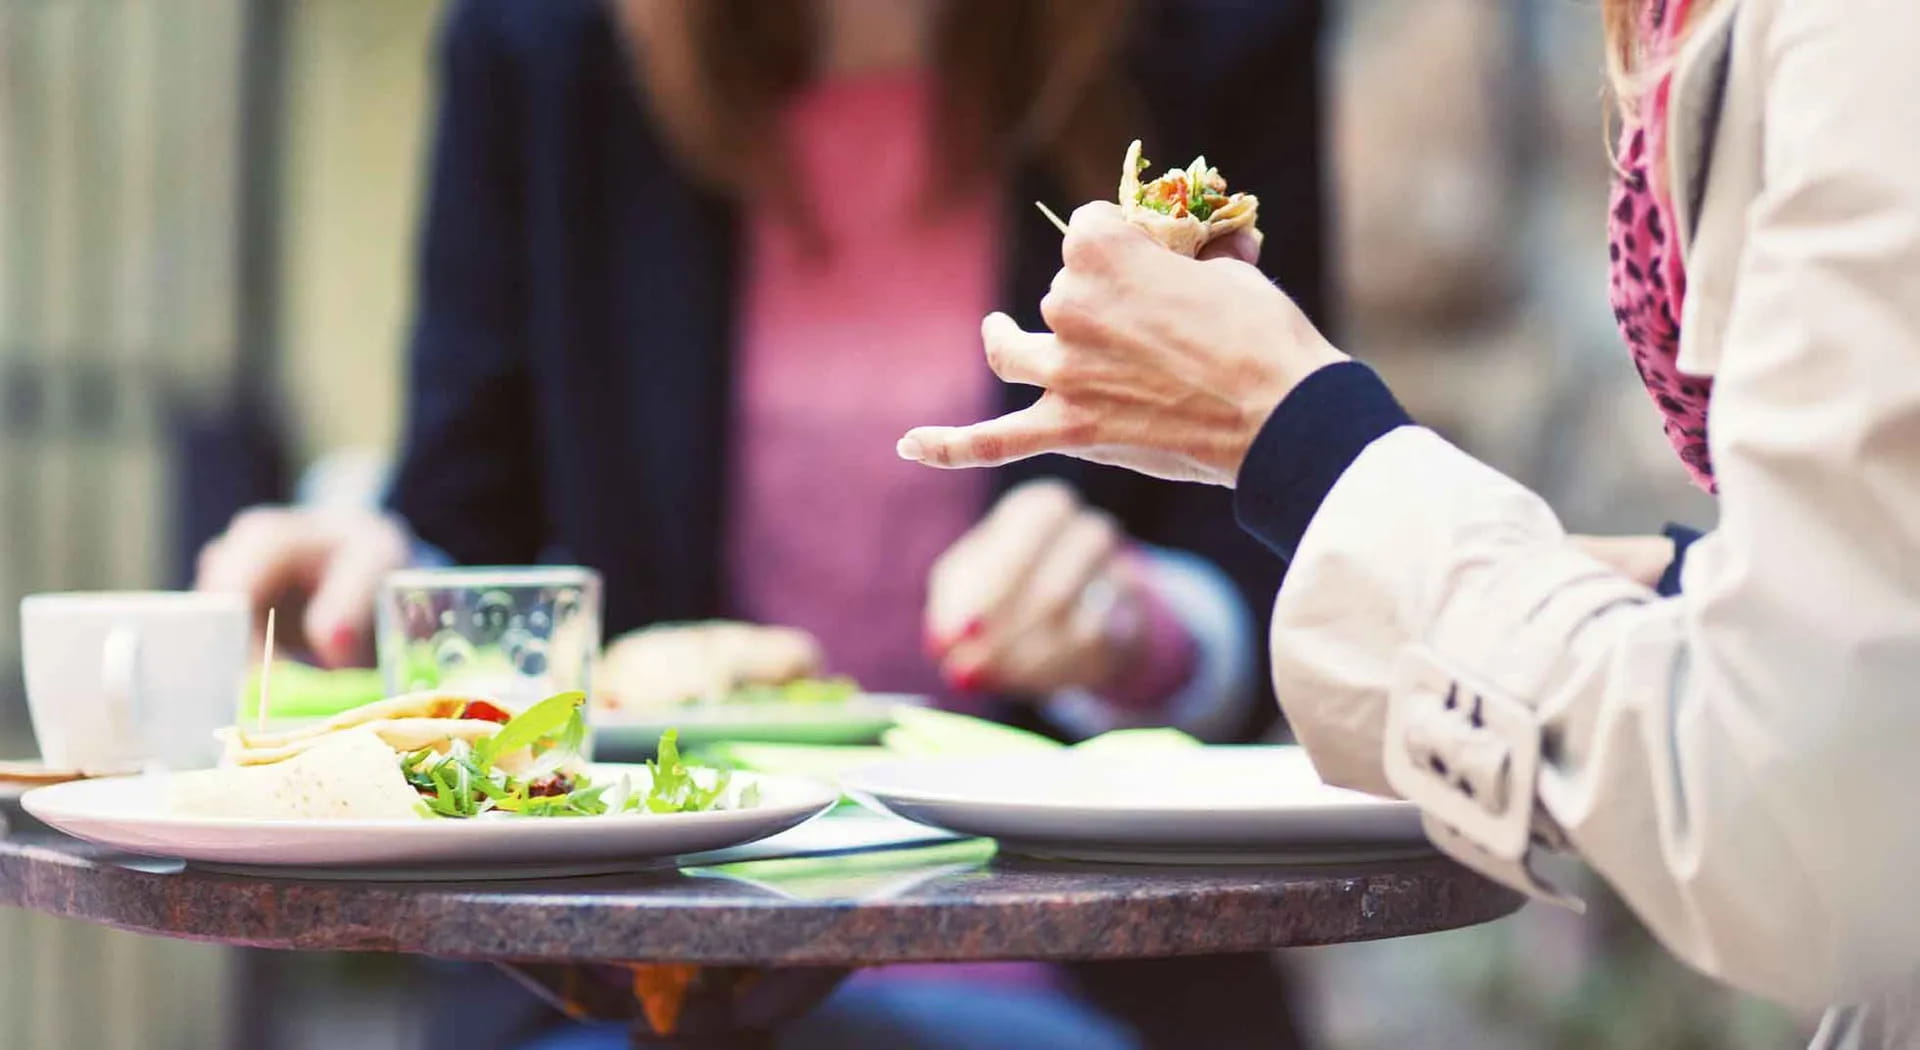 The rules of office lunch, a small modern etiquette